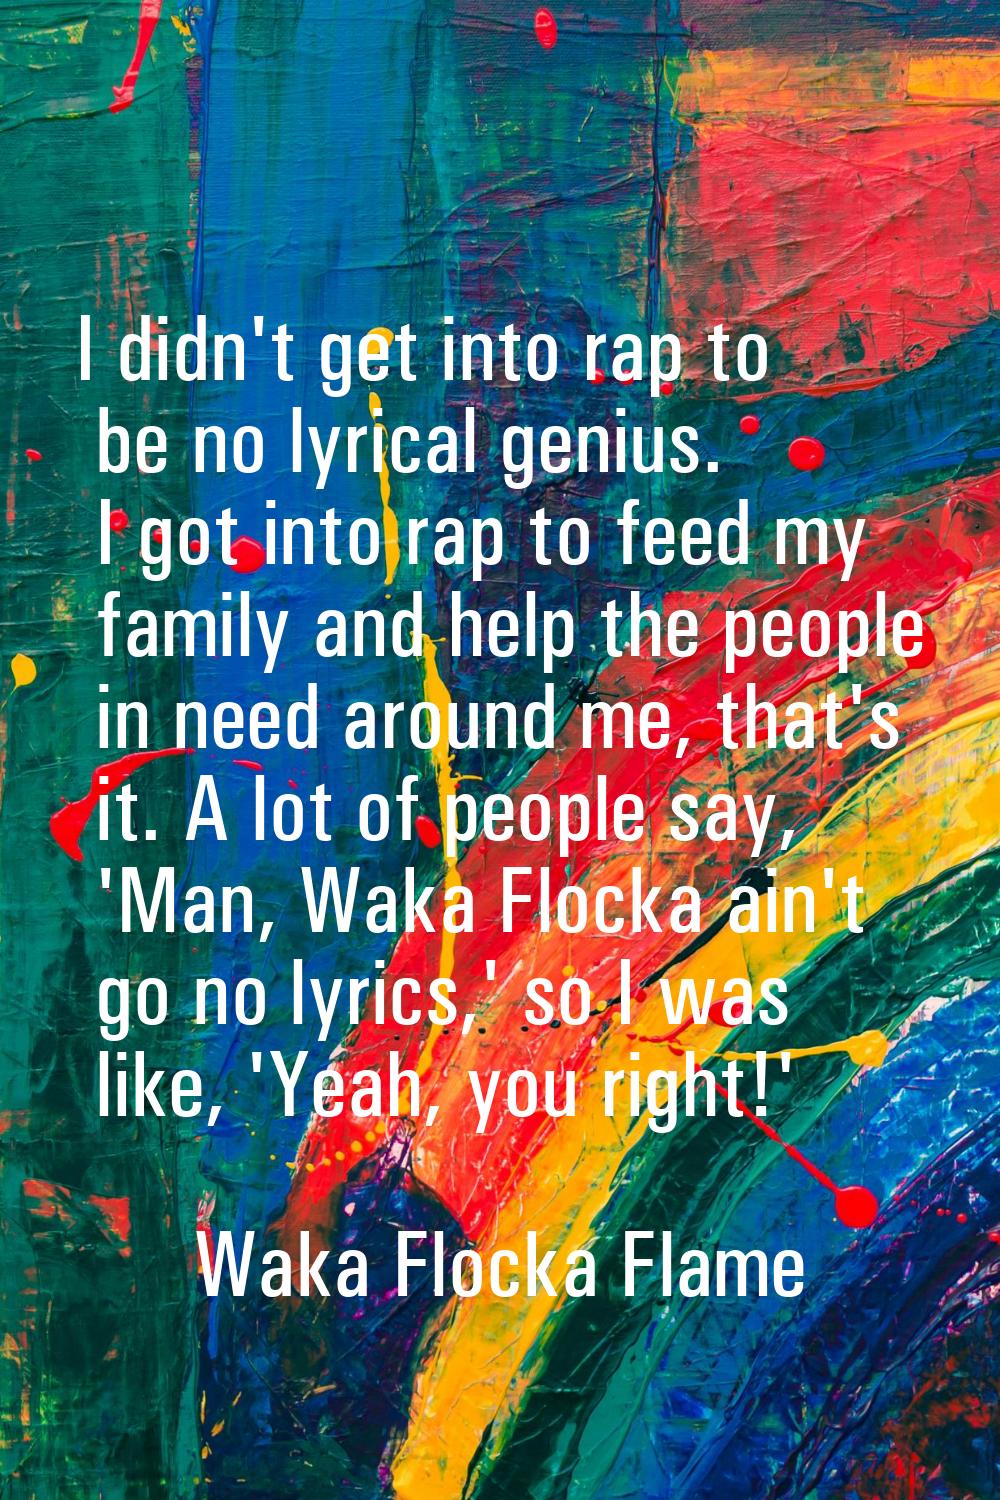 I didn't get into rap to be no lyrical genius. I got into rap to feed my family and help the people